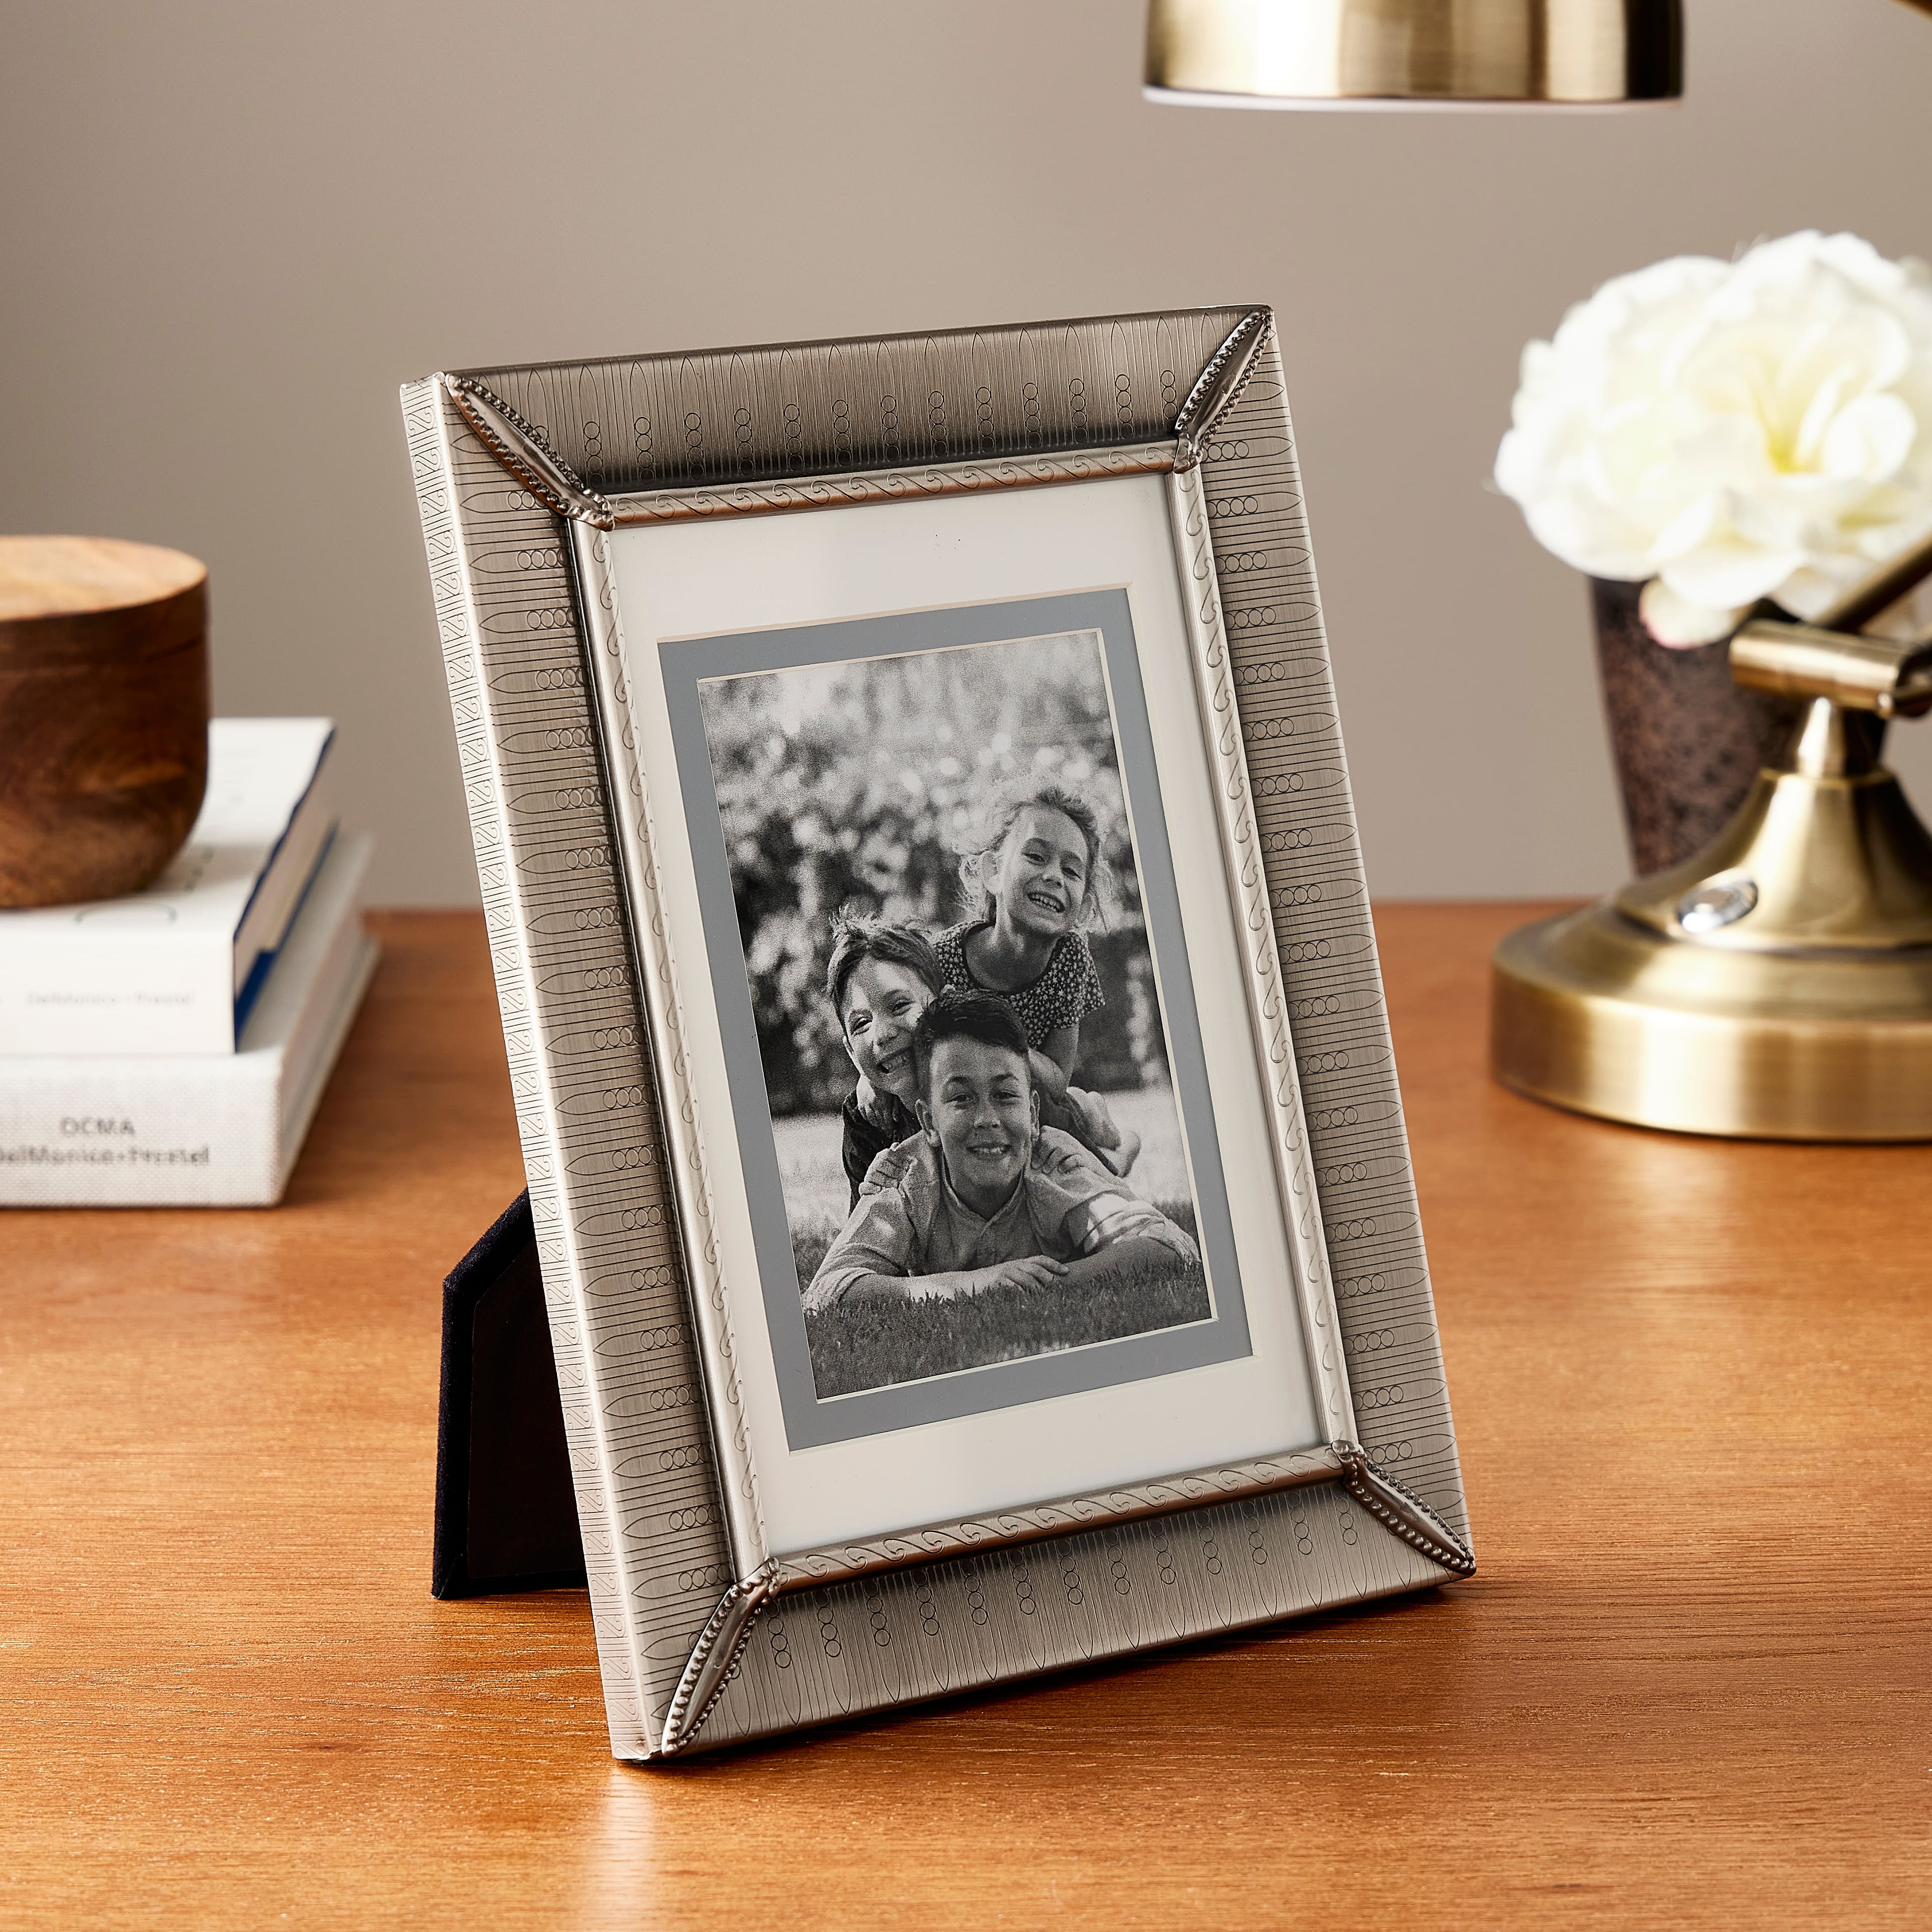 Etched Pewter Frame with Double Mat, Expressions&#x2122; by Studio D&#xE9;cor&#xAE;